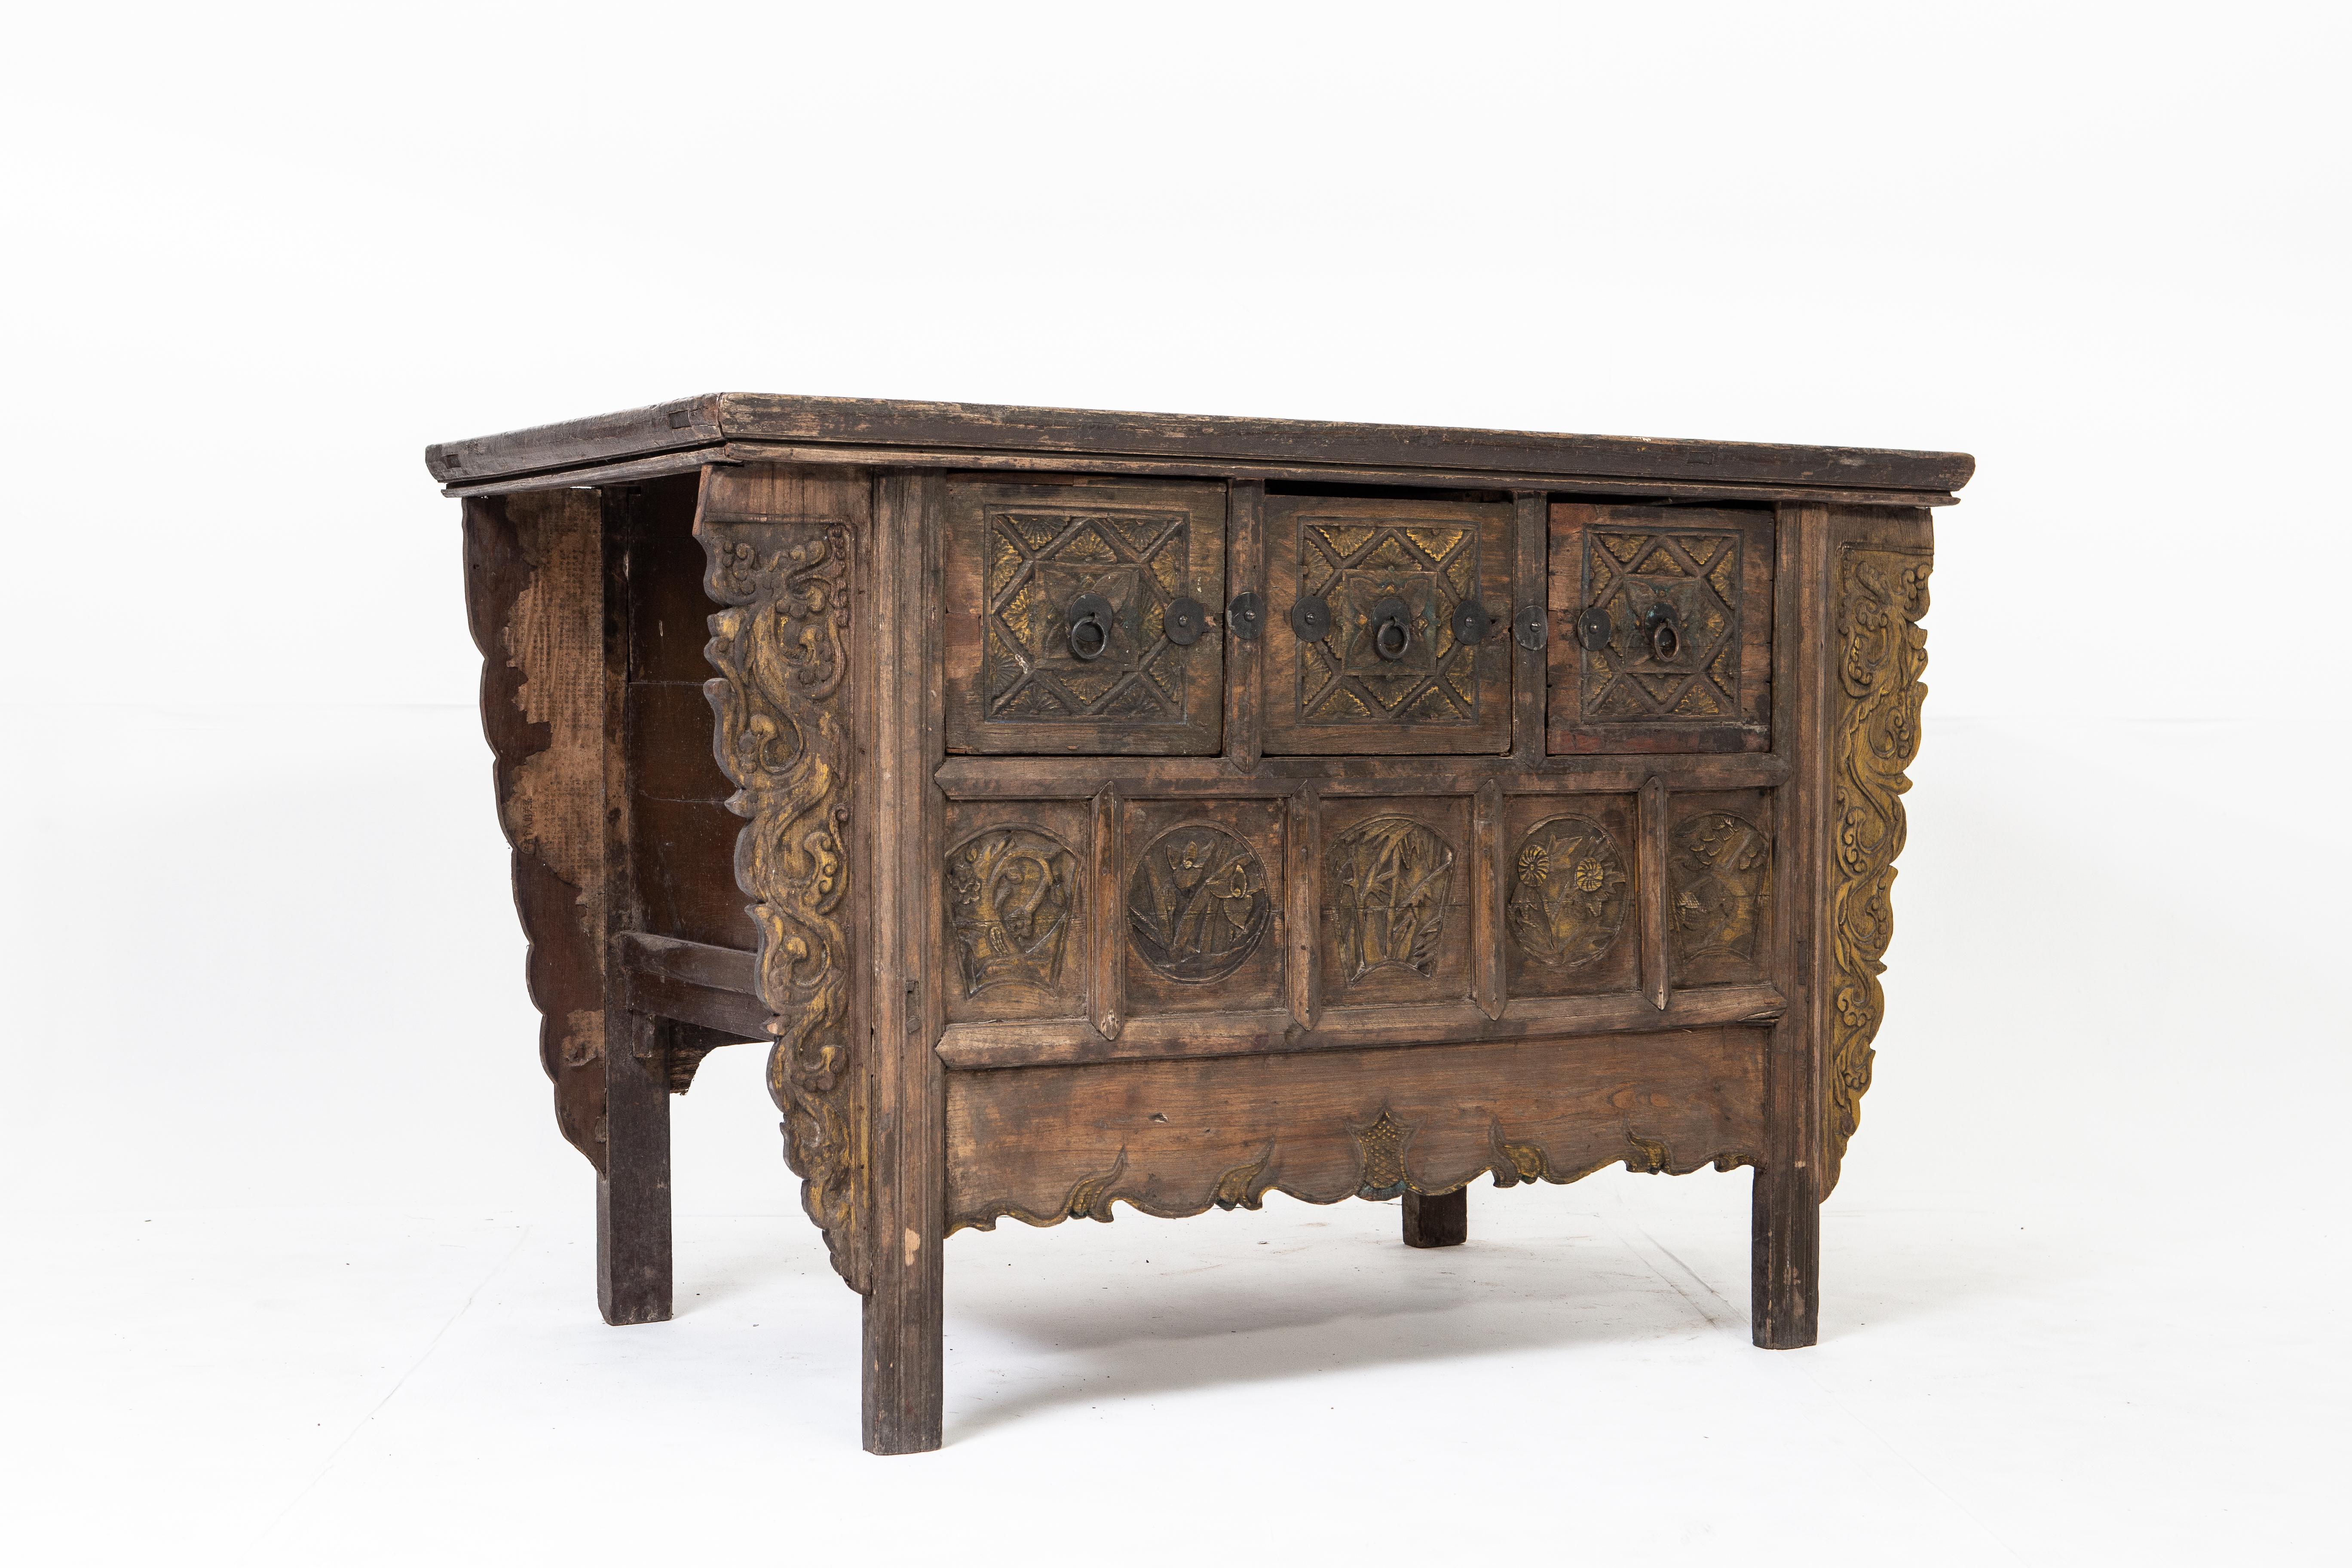 This handsome chest from Henan, China is made of elm wood and dates to the mid-1900s (during the time of Mao Zedong). The piece features intricate hand-carved details, three drawers, and a beautifully aged patina with remnants of its original color.